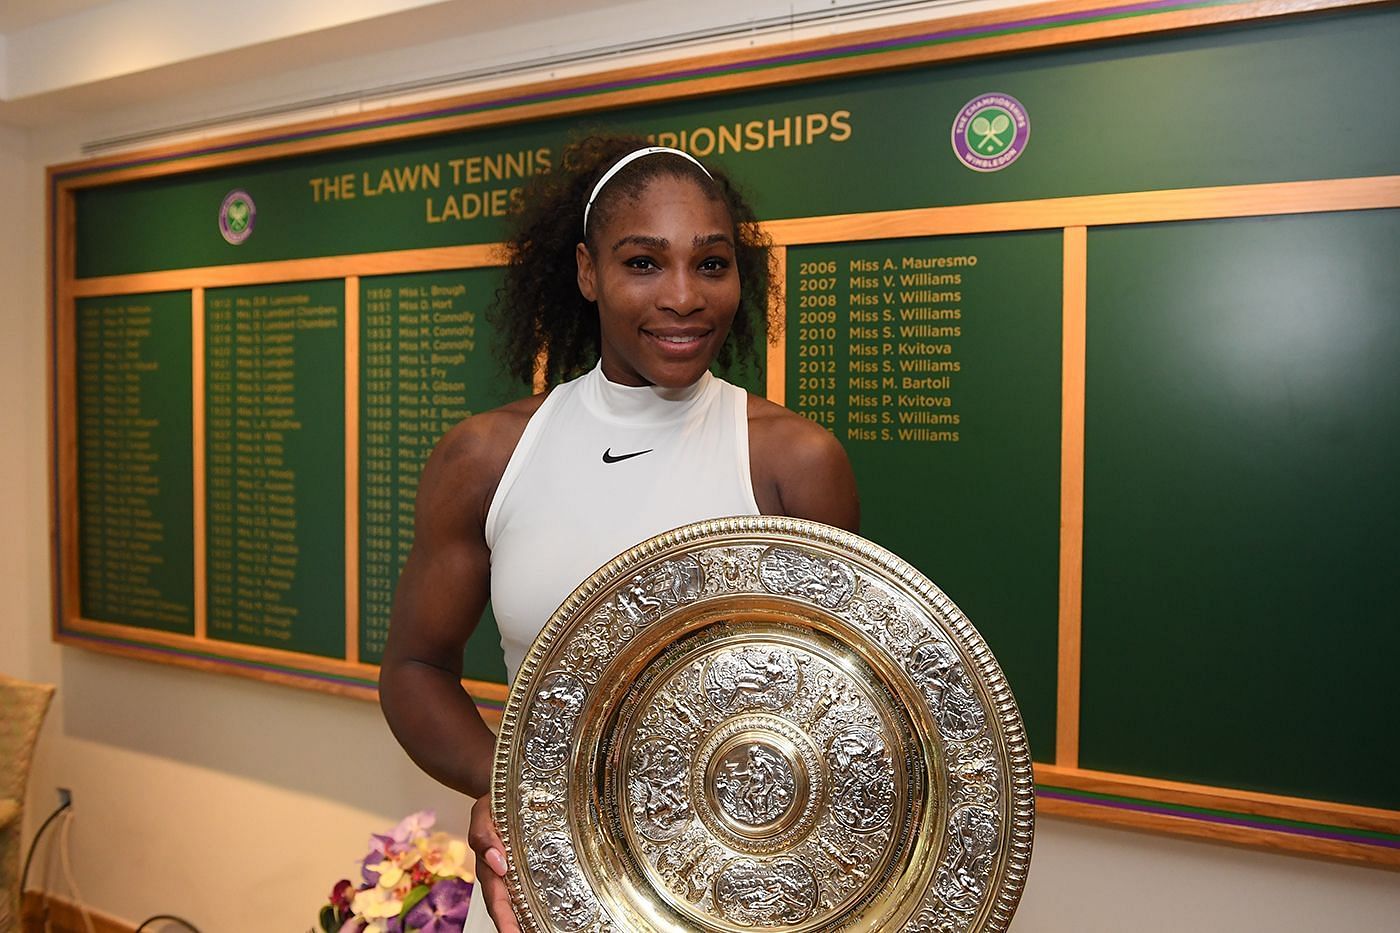 The Wimbledon honors board will not have &#039;Miss&#039; and &#039;Mrs&#039; prefixes